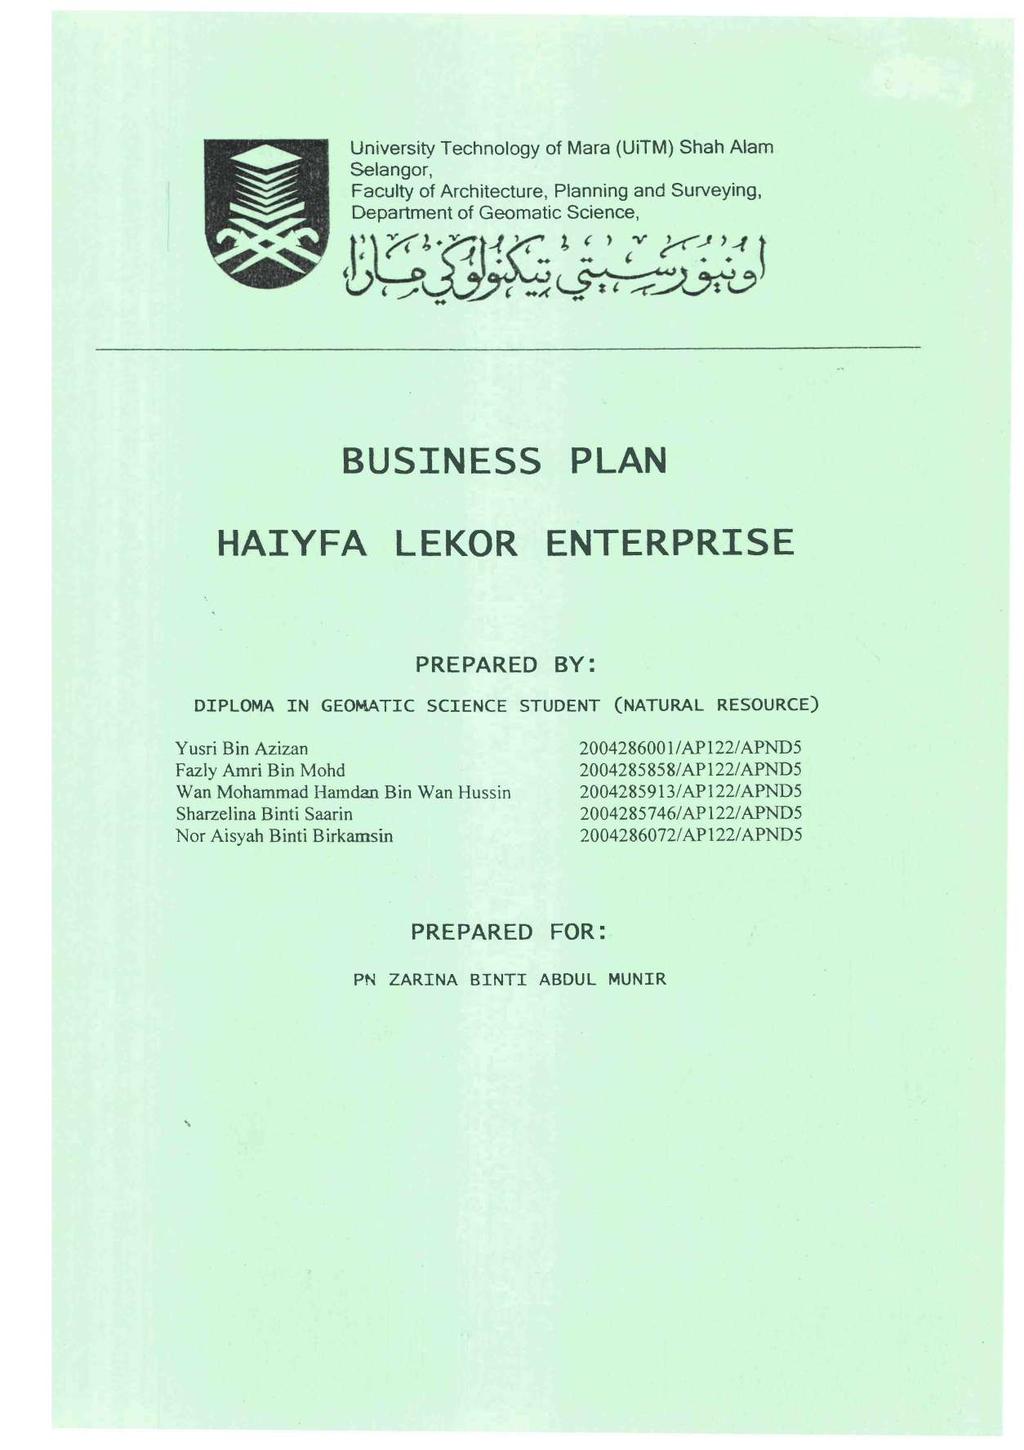 University Technology of Mara (UiTM) Shah Alam Seiangor, Faculty of Architecture, Pfenning and Surveying, Department of Geomatic Science, BUSINESS PLAN HAIYFA LEKOR ENTERPRISE PREPARED BY: DIPLOMA IN